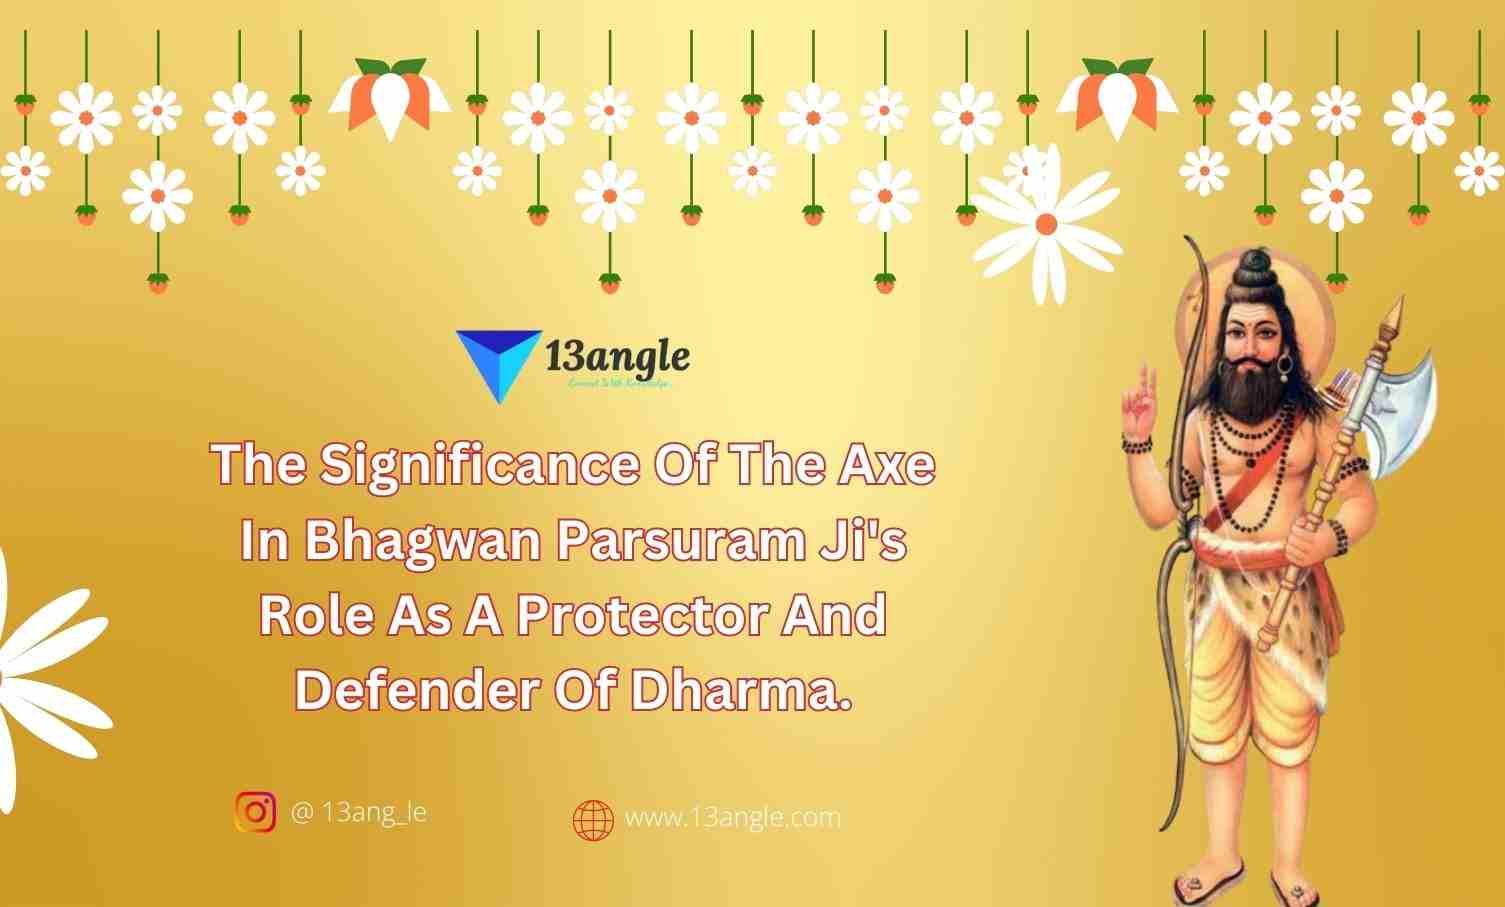 The Significance Of The Axe In Bhagwan Parsuram Ji's Role As A Protector And Defender Of Dharma- The Bridge (13angle)